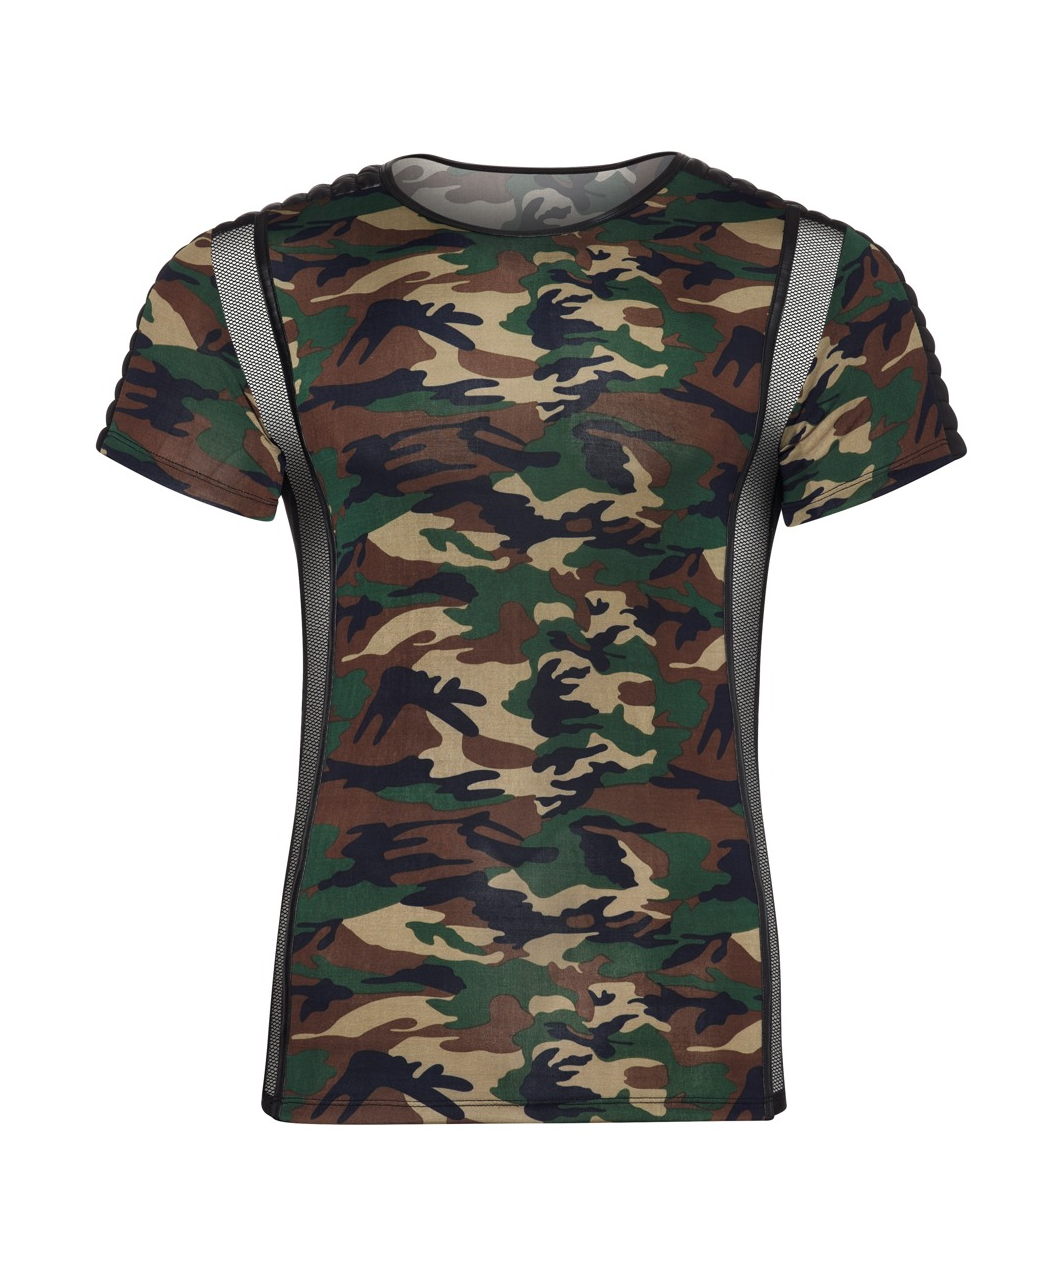 NEK camouflage T-shirt with powernet inserts